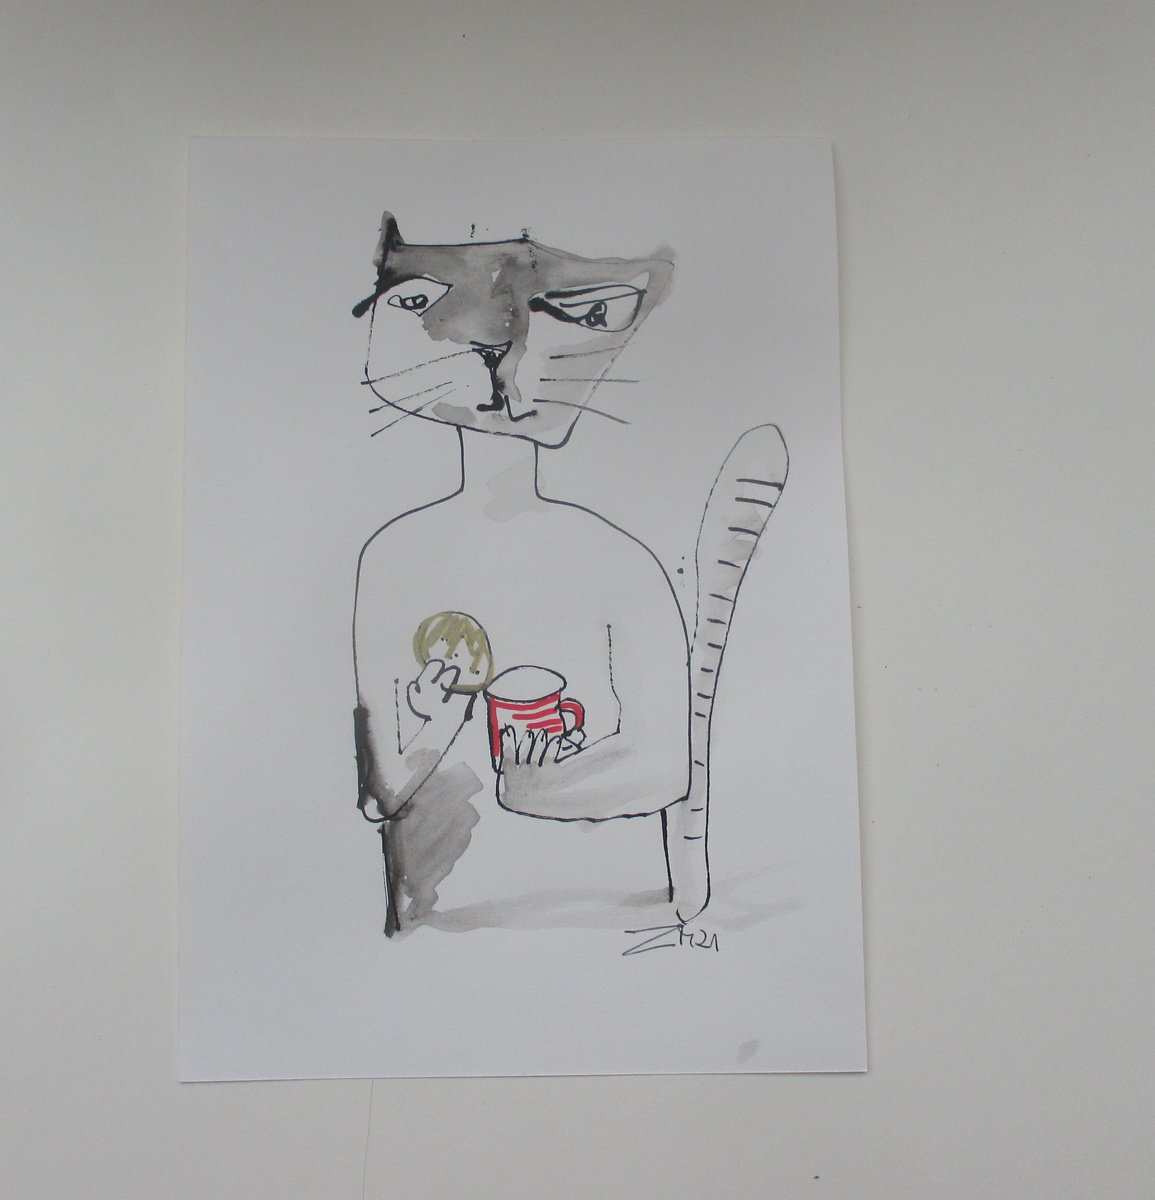 crazy cat needs coffee 8,2 x 11,4 inch unique mixedmedia drawing by Sonja Zeltner-Muller